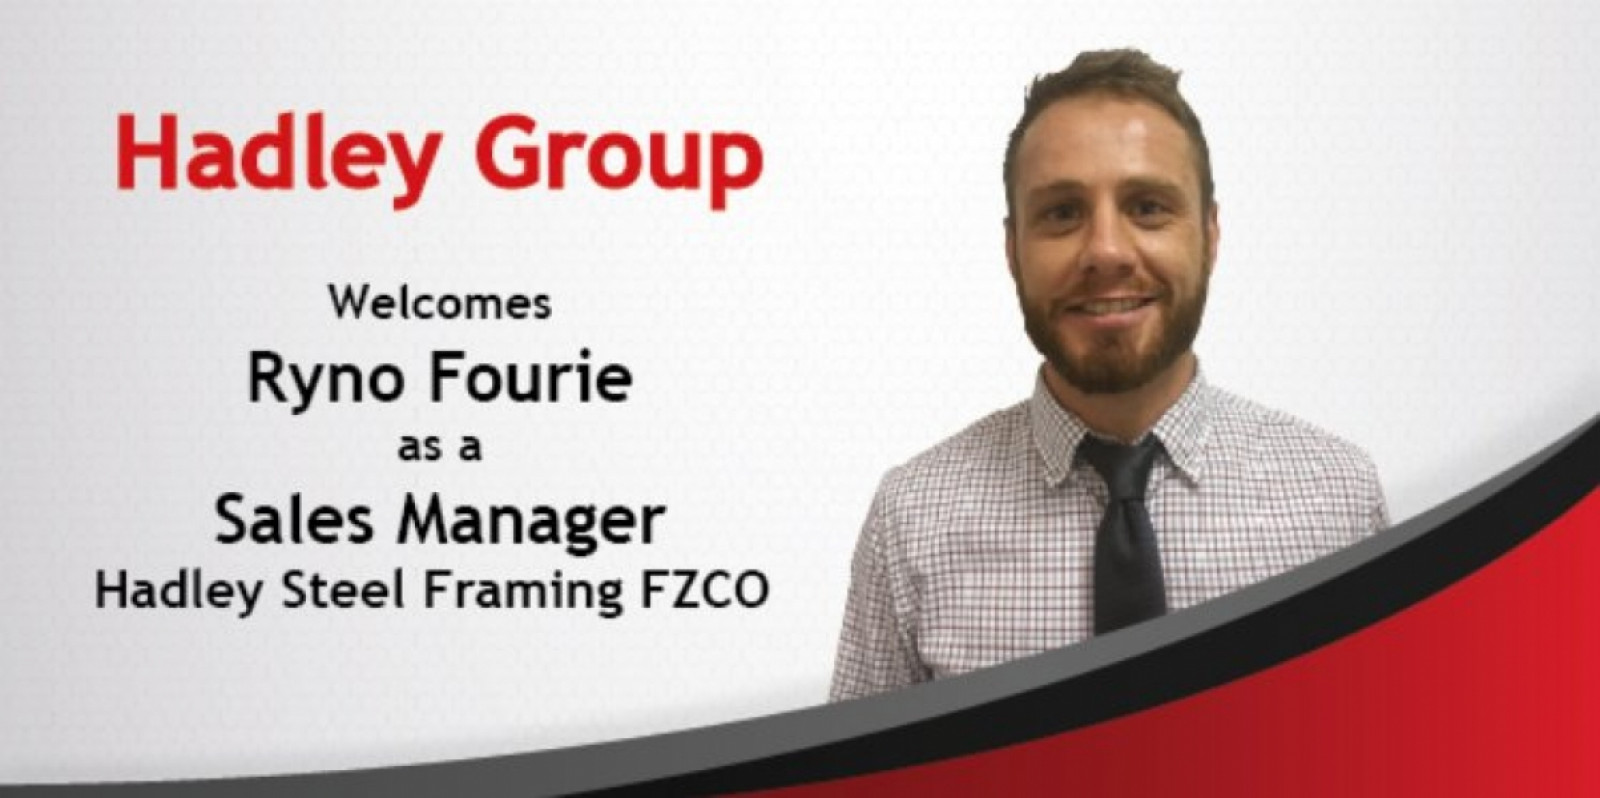 Welcome Ryno Fourie to the Hadley Group!